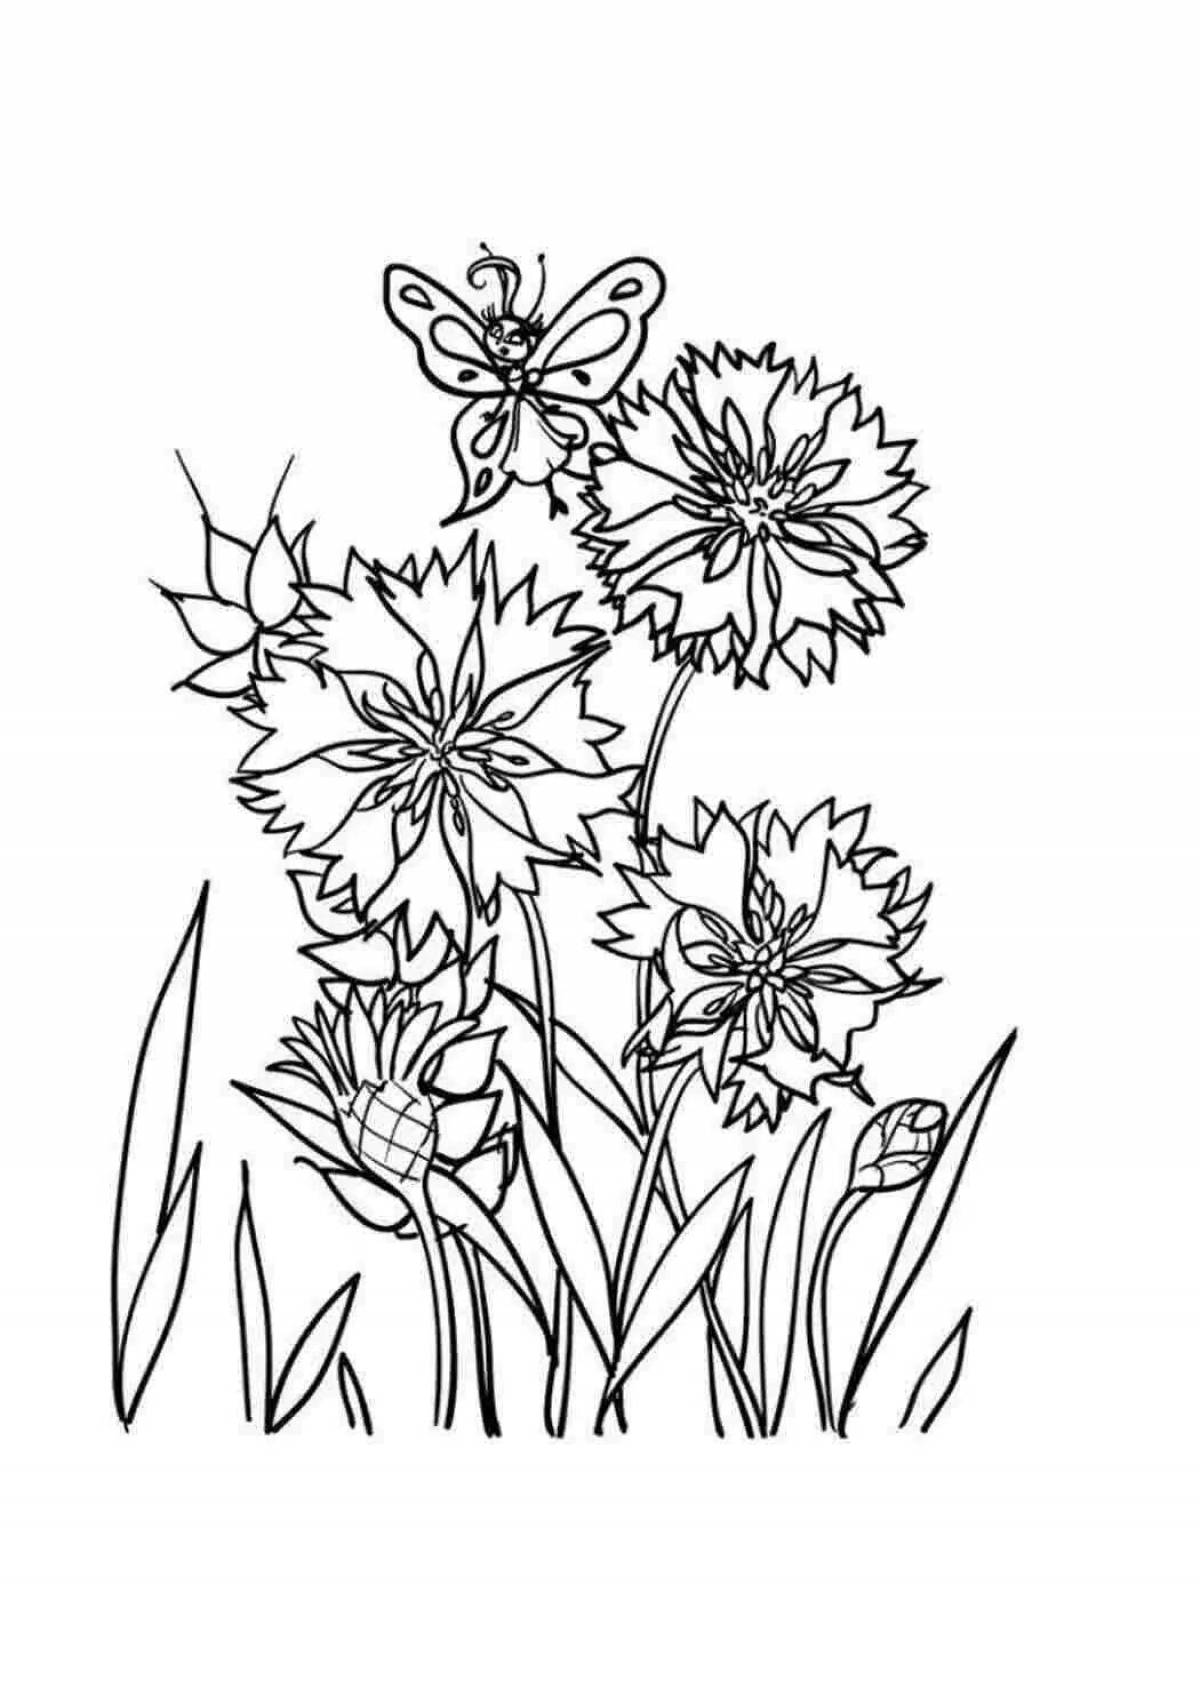 Coloring big wildflowers for kids